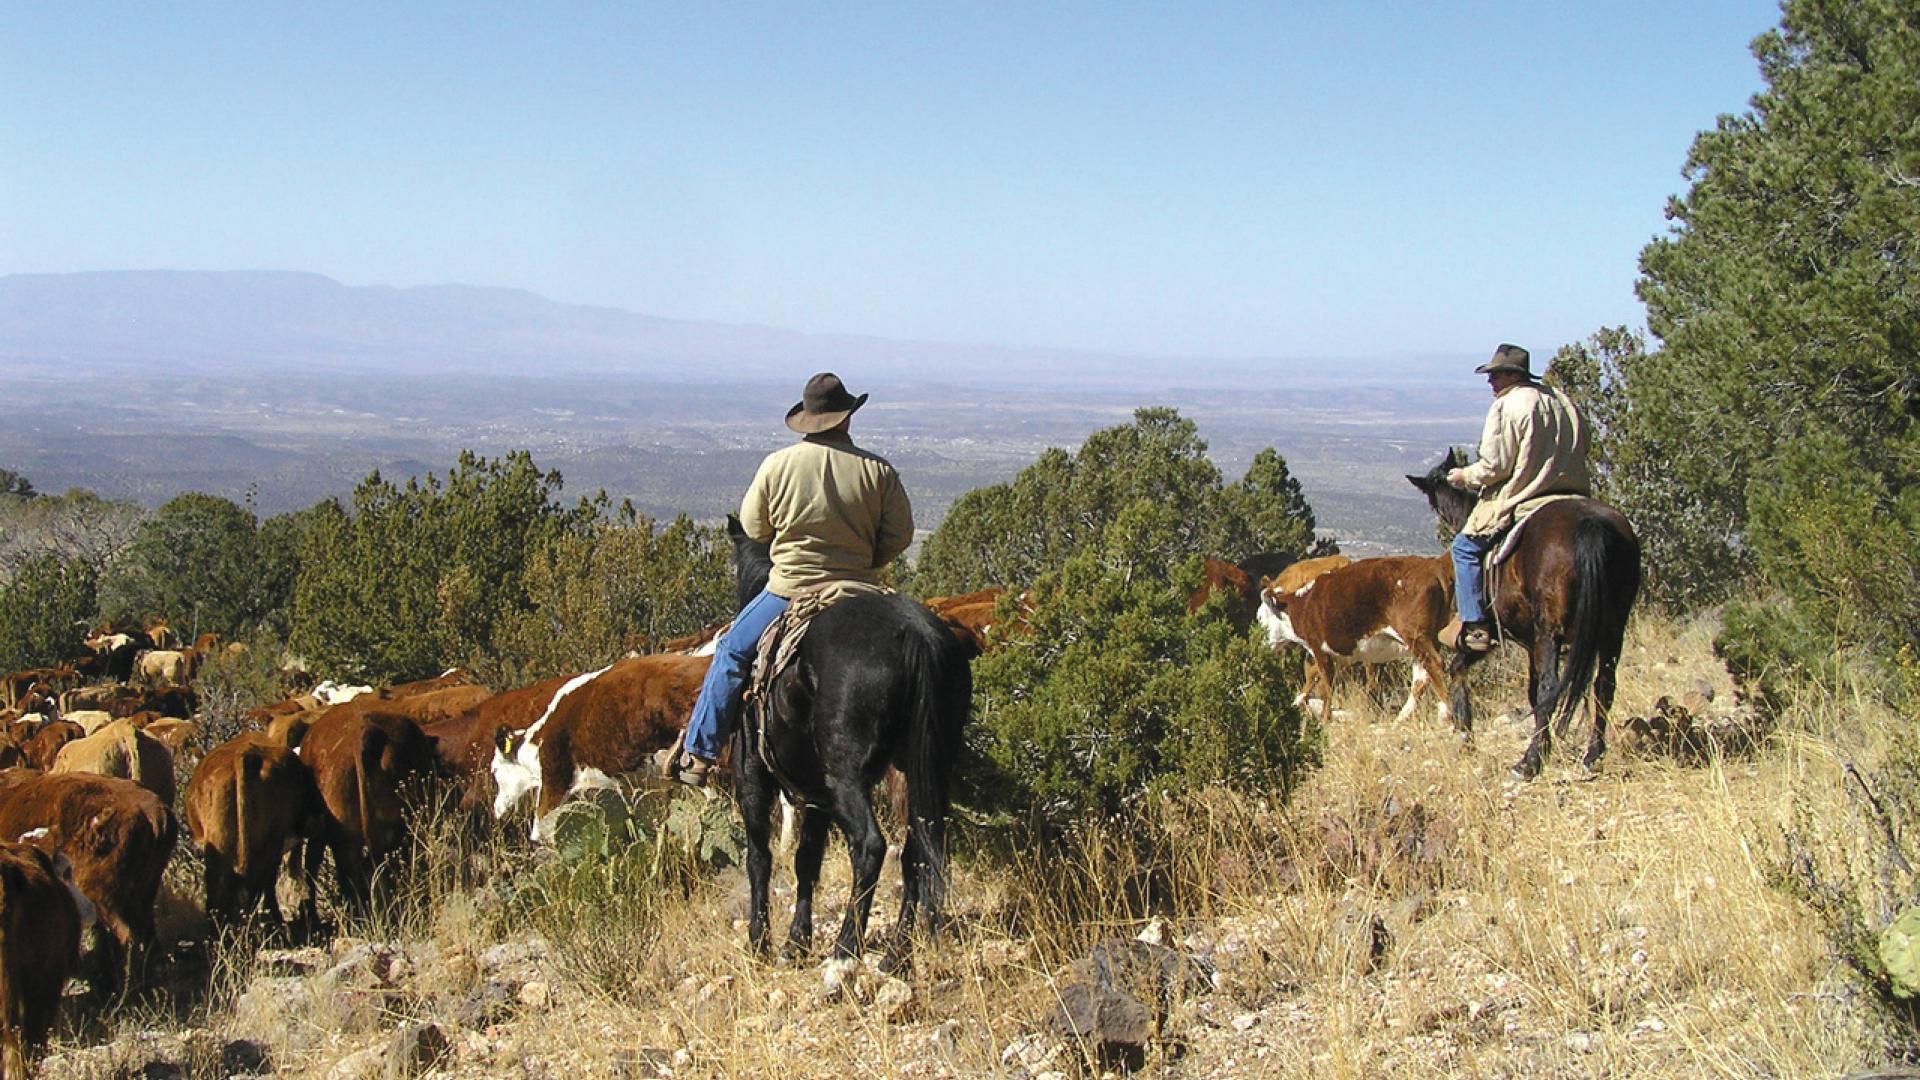 Cattle being herded by cowboys on horseback